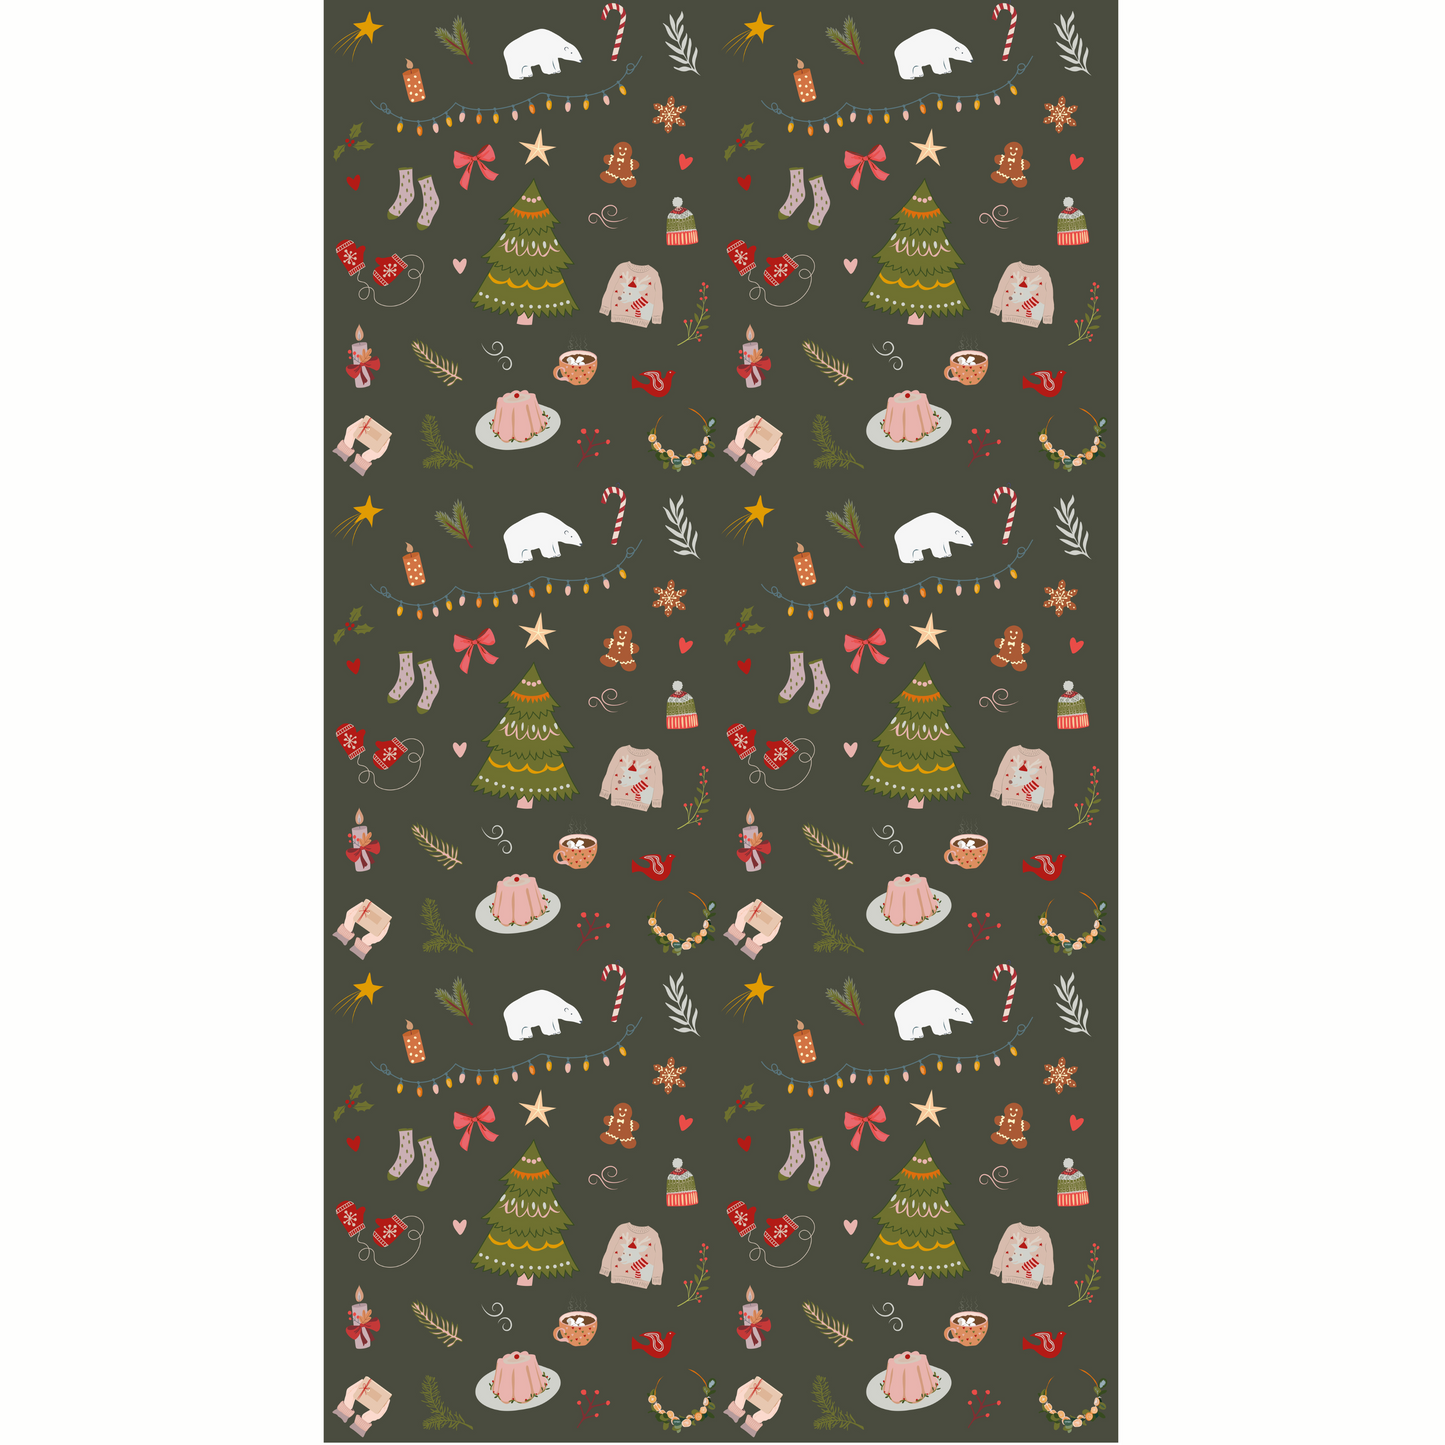 Wrapping sheets - Christmas 2022 (5 different patterns)